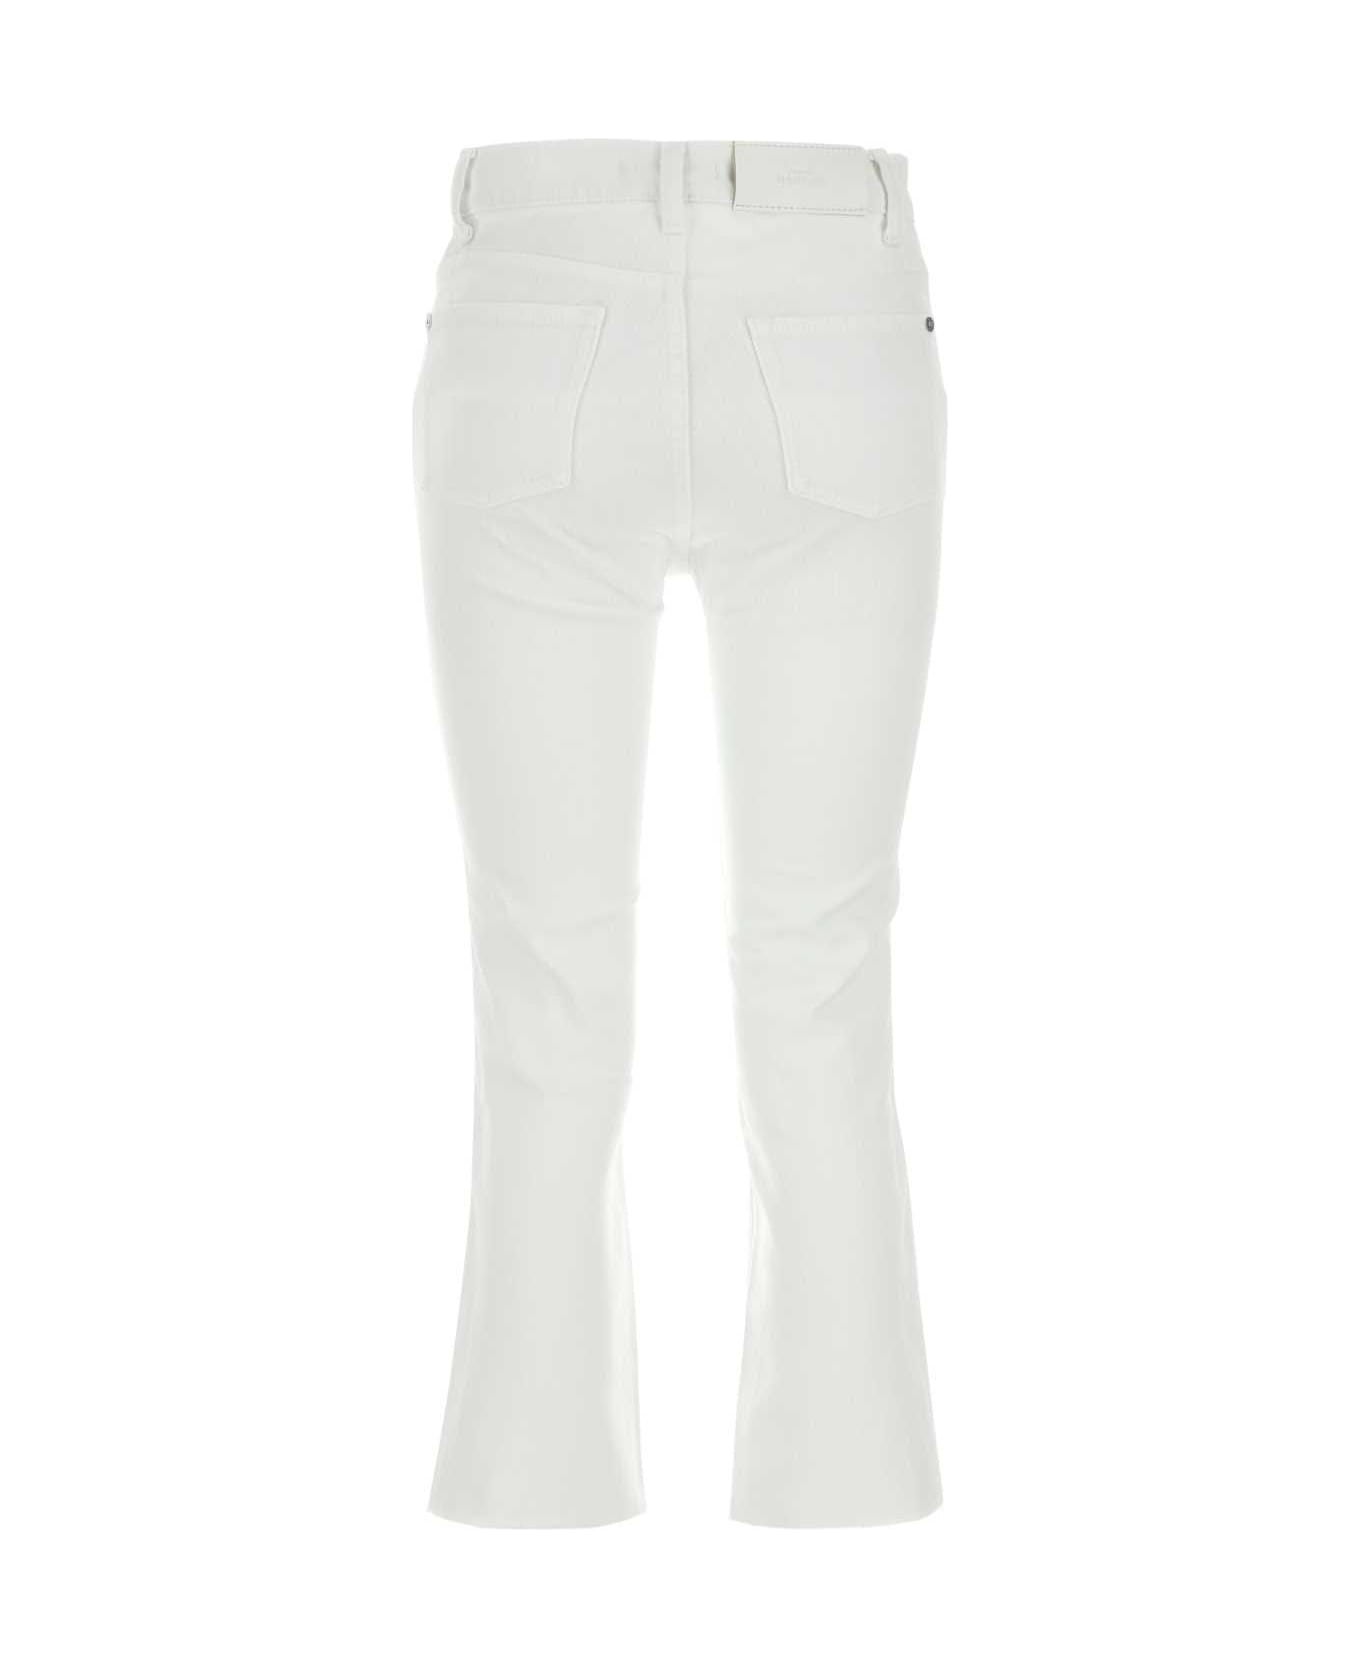 7 For All Mankind White Stretch Denim Logan Stovepipe Jeans - YACHT